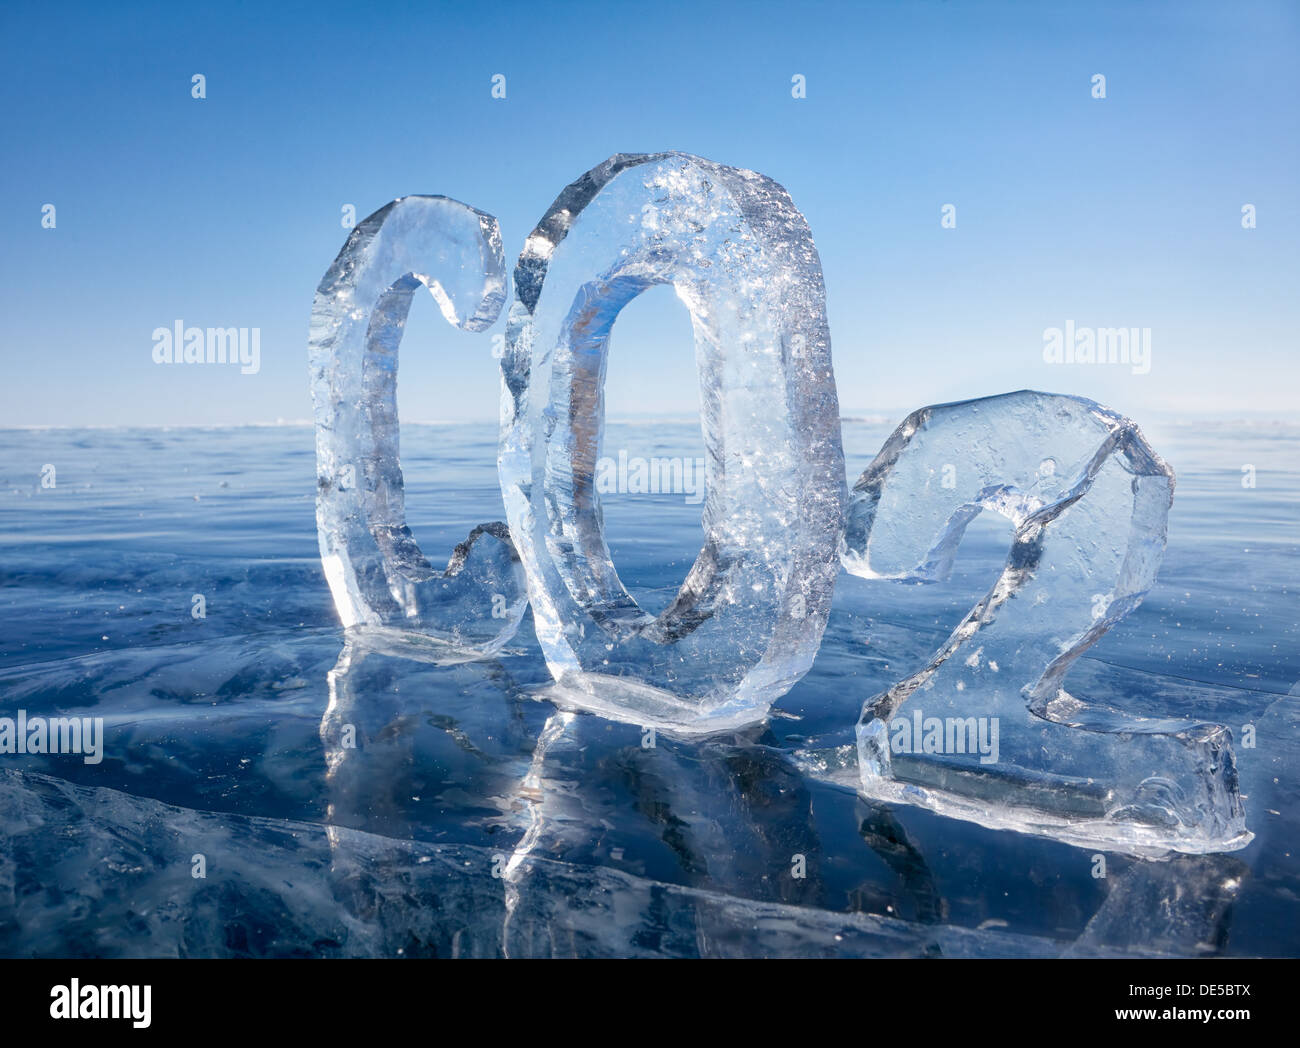 Chemical formula of greenhouse gas carbon dioxide CO2 made from ice on winter frozen lake Baikal under blue sky Stock Photo